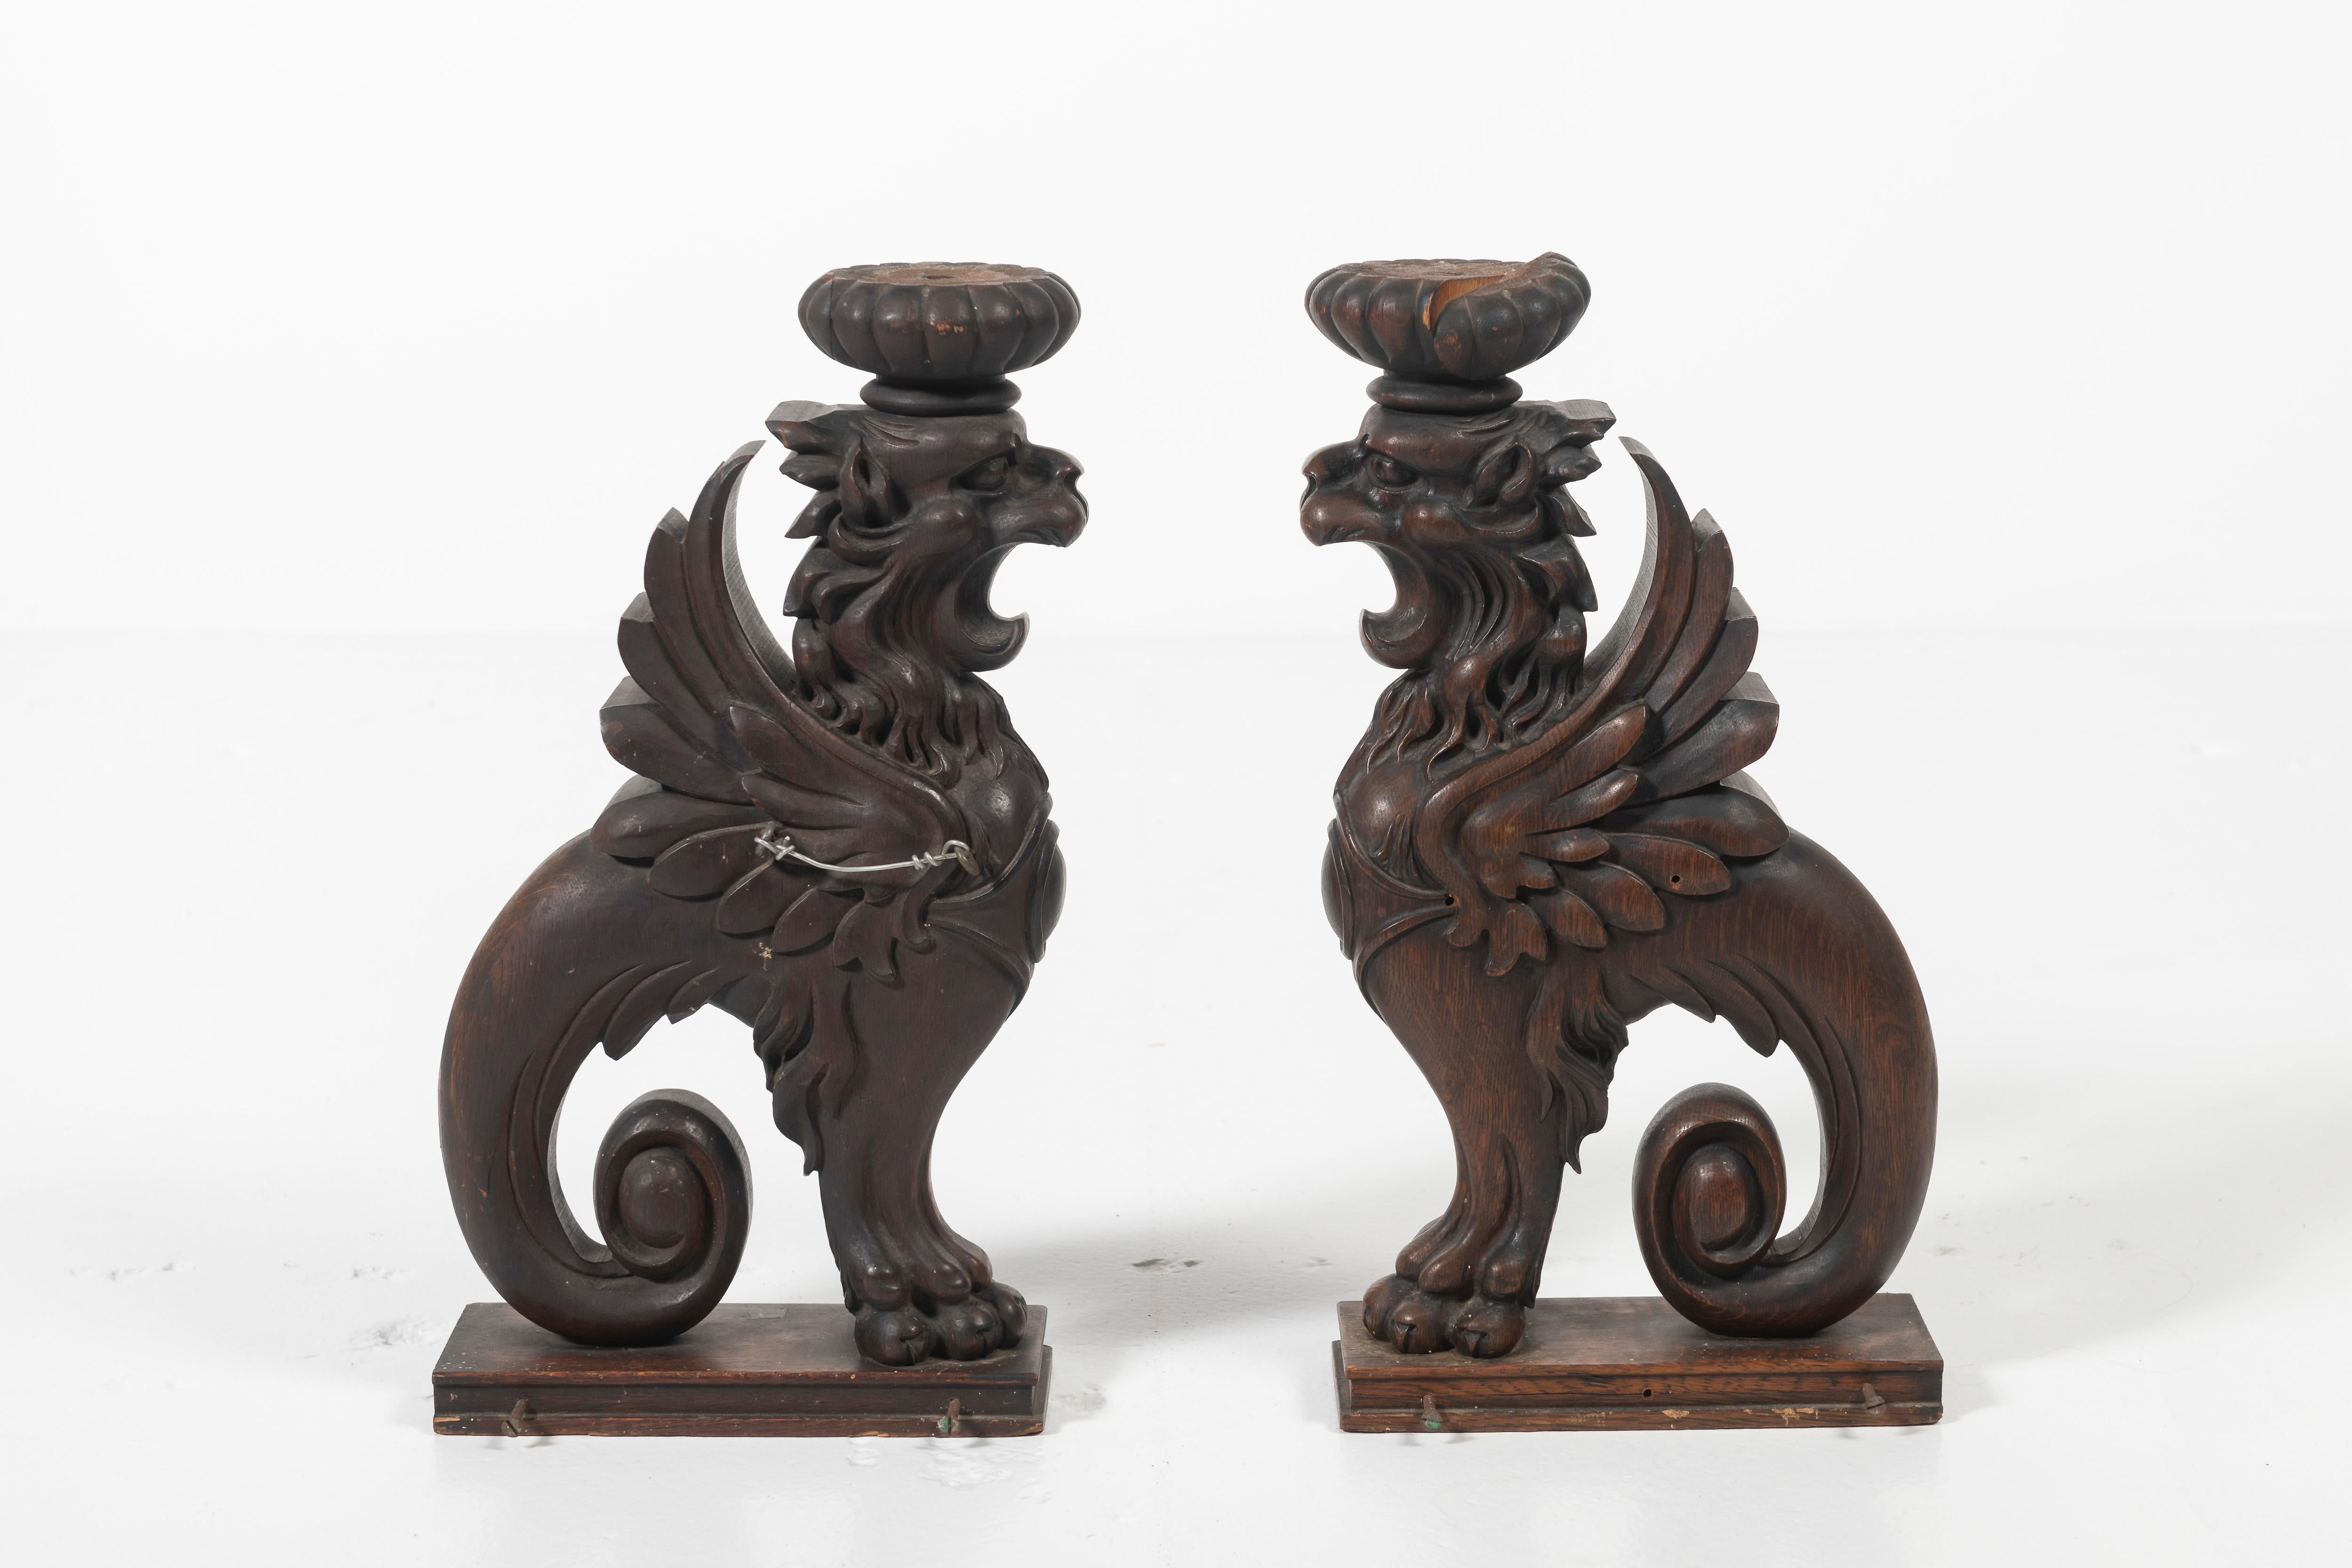 Lovely pair of antique oak carved winged Griffins circa 1900s. Good size and good condition, these artful accessories are sure to imbue the space with character and imagination. Can be fitted for candles or other items.